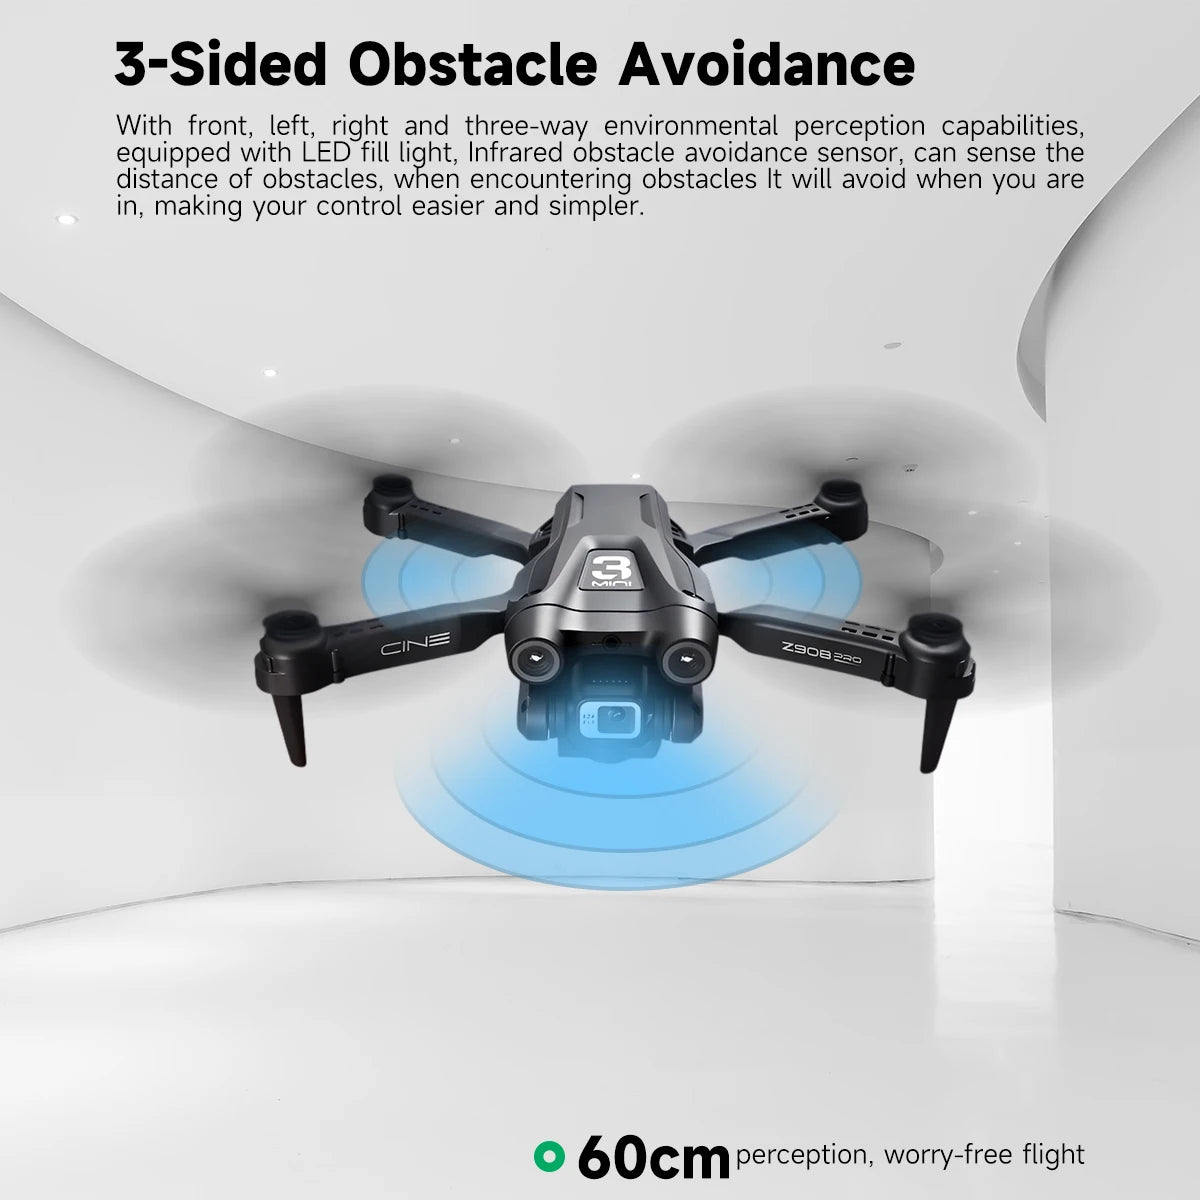 Z908 Pro Drone, zbob 325 is a 3-sided obstacle avoidance with